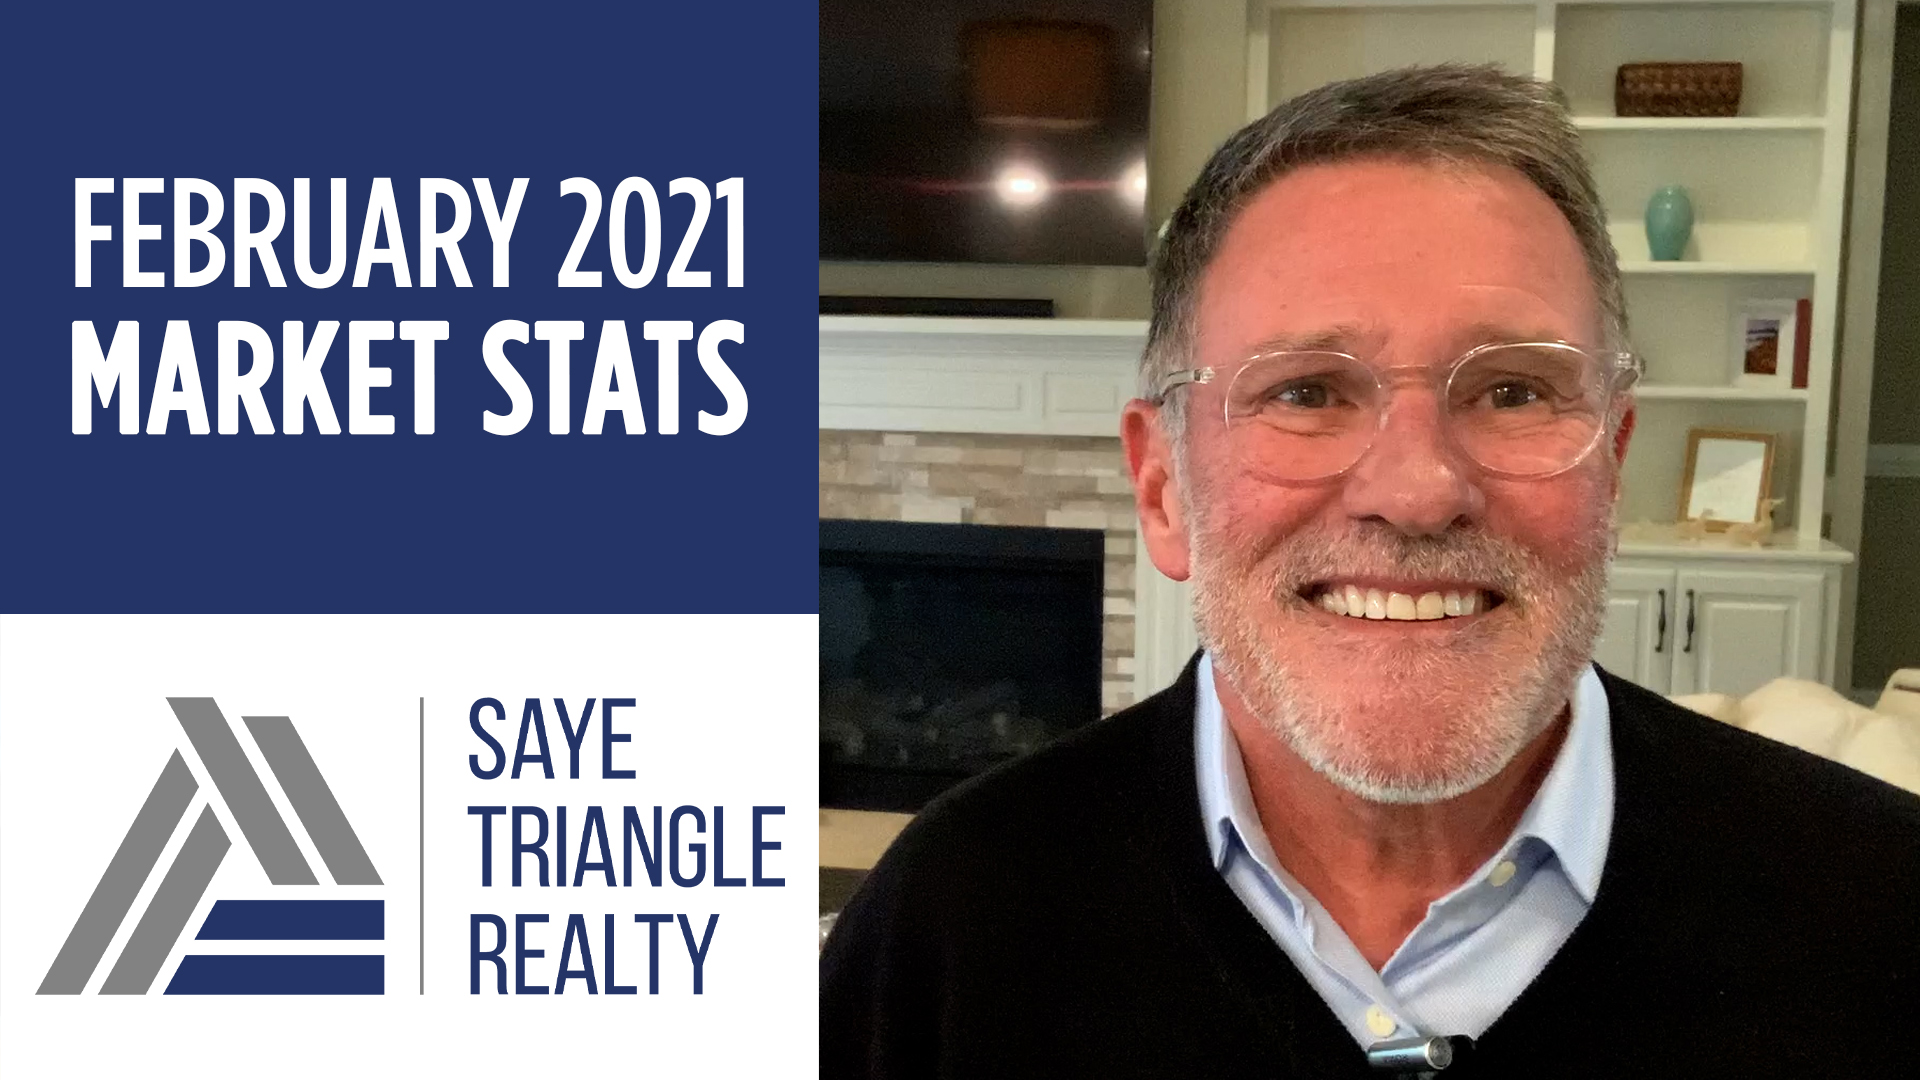 Our Market’s February 2021 Market Stats